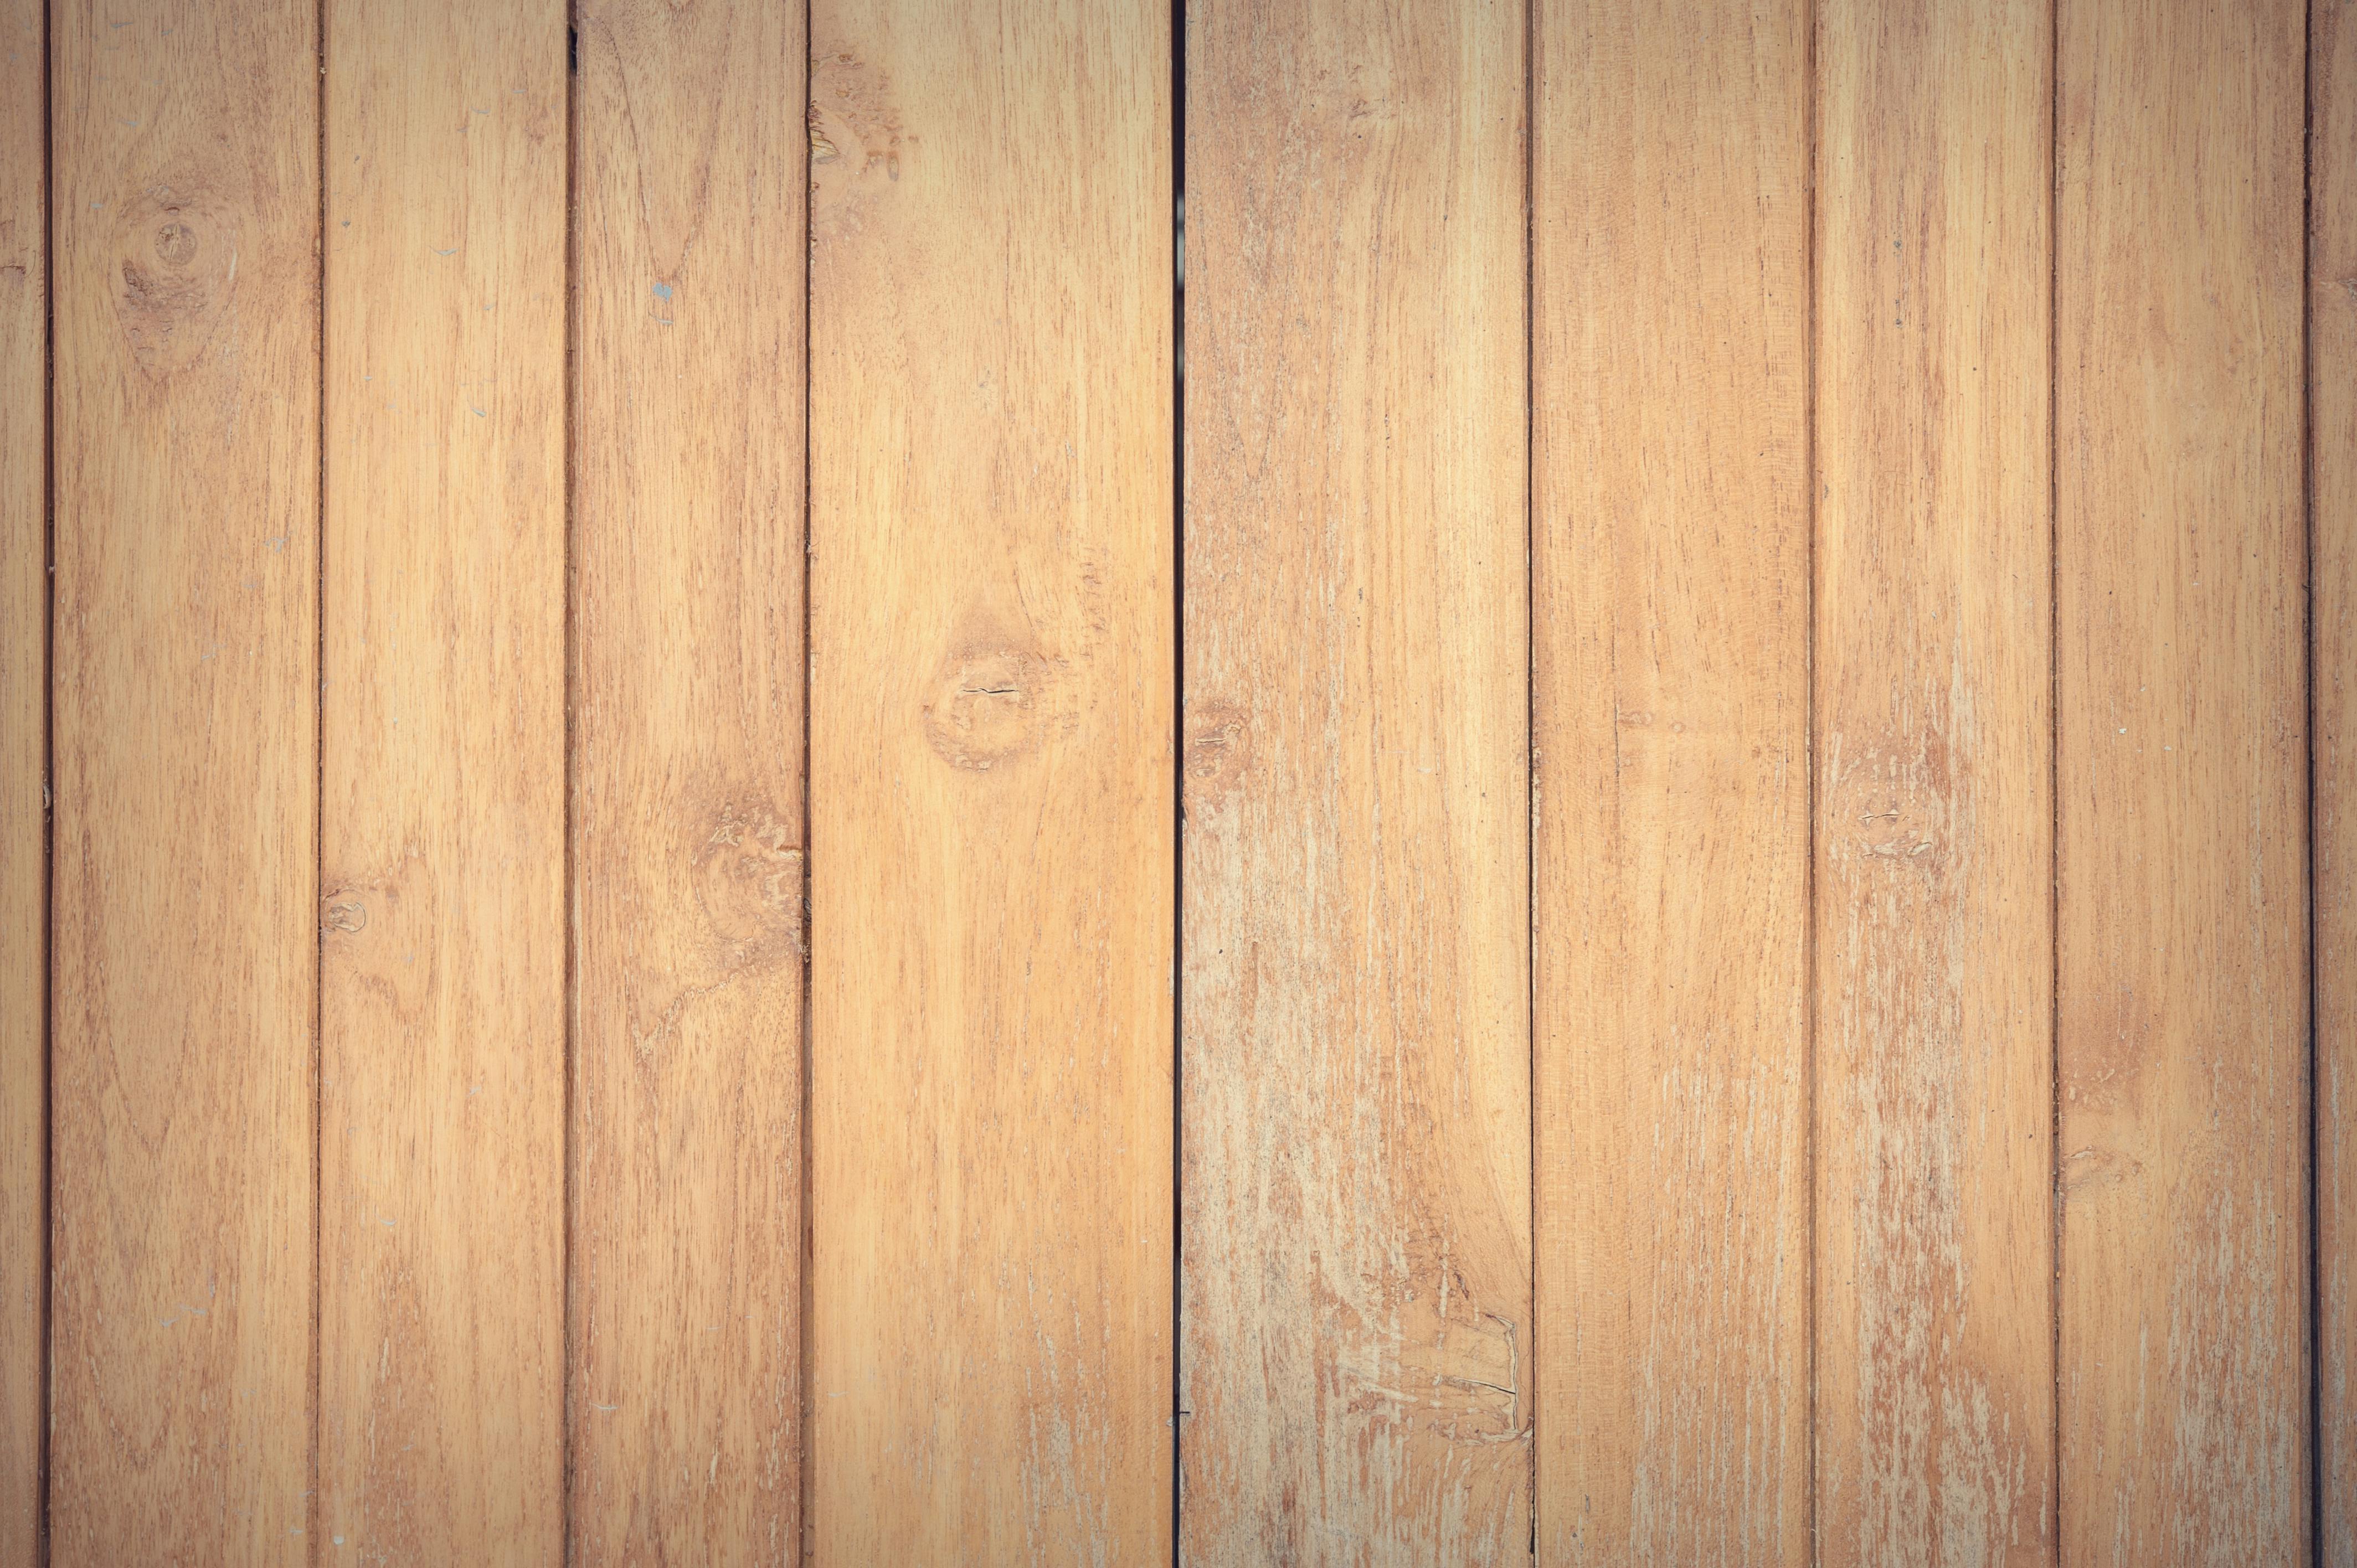 Rough Wooden Planks Taken Up Close Stock Photo - Download Image